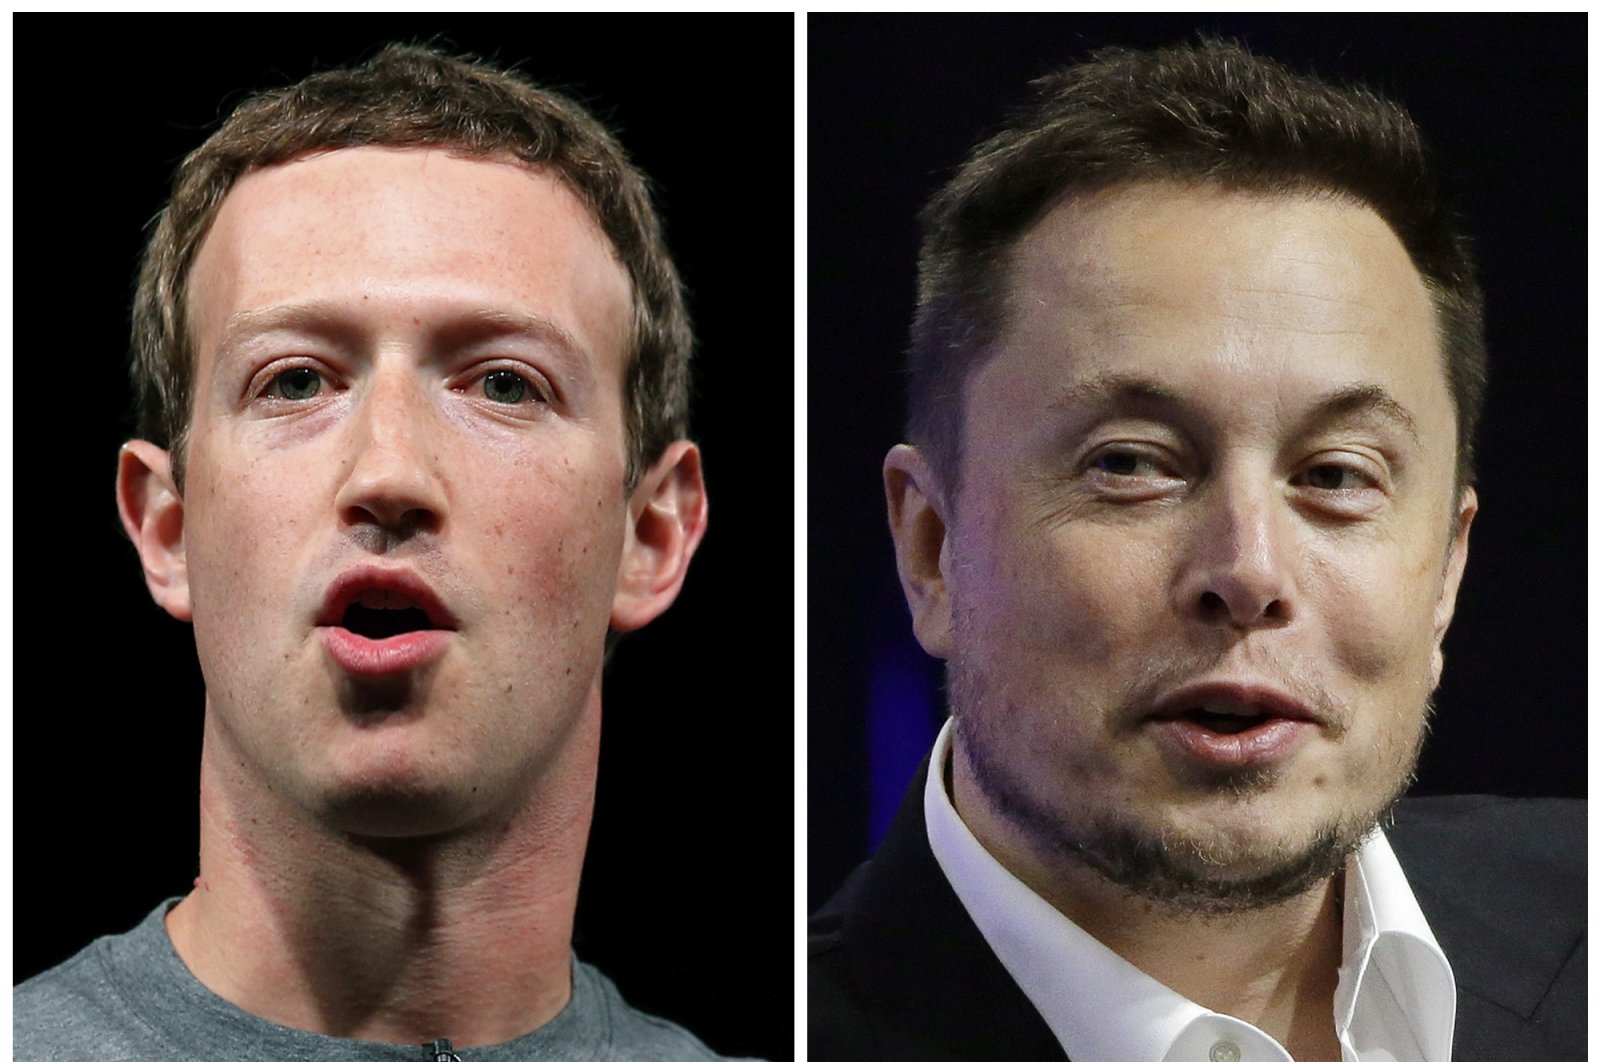 This combo of file images shows Facebook CEO Mark Zuckerberg (L) and Tesla and SpaceX CEO Elon Musk. Elon Musk and Mark Zuckerberg are ready to fight, offline. (AP File Photo)